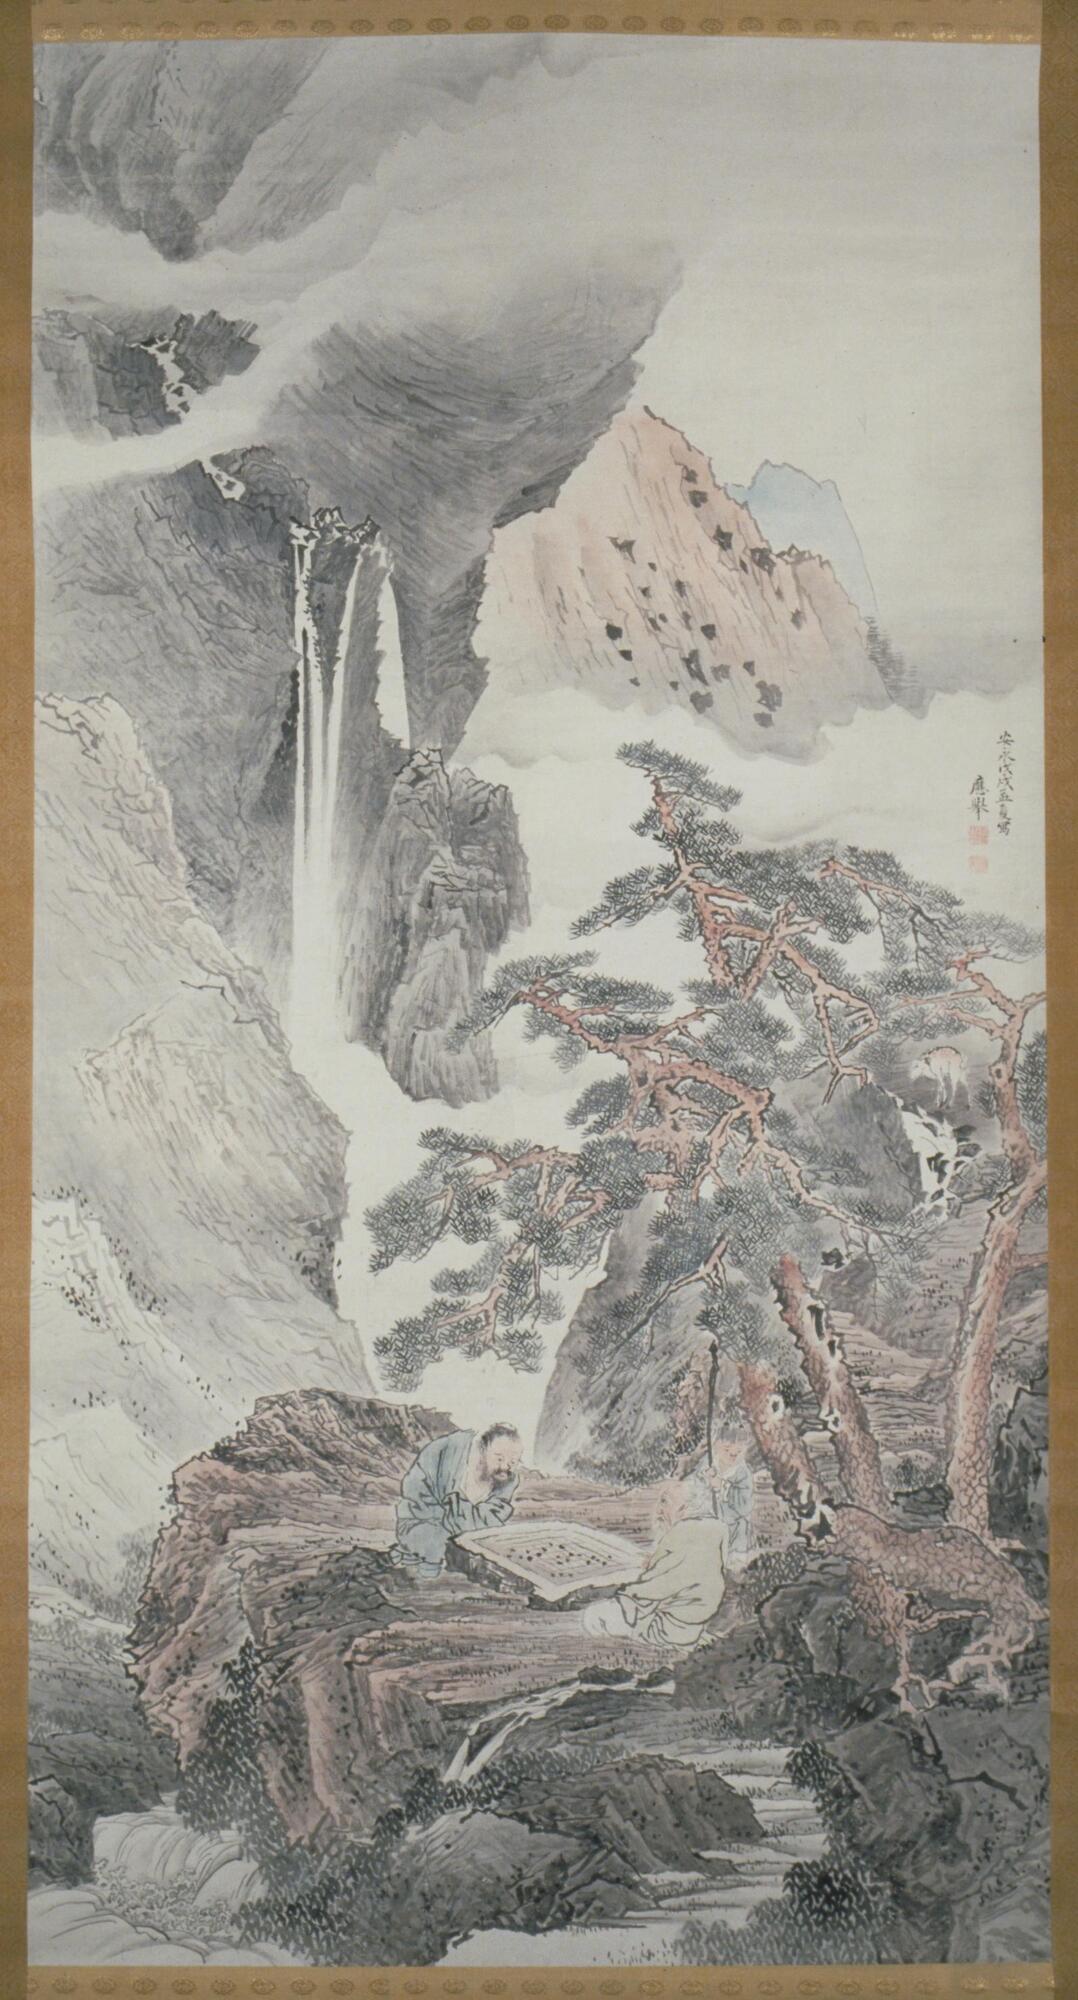 There are two scholars playing the board game Go on a cliffside and by a waterfall. One scholar is facing toward us and wearing blue, while the other scholar is facing away from us and wearing white. There is a stone path leading down, a tree hanging above them, a mountainside in the background from which the waterfall comes from, and mist coming from the waterfall.